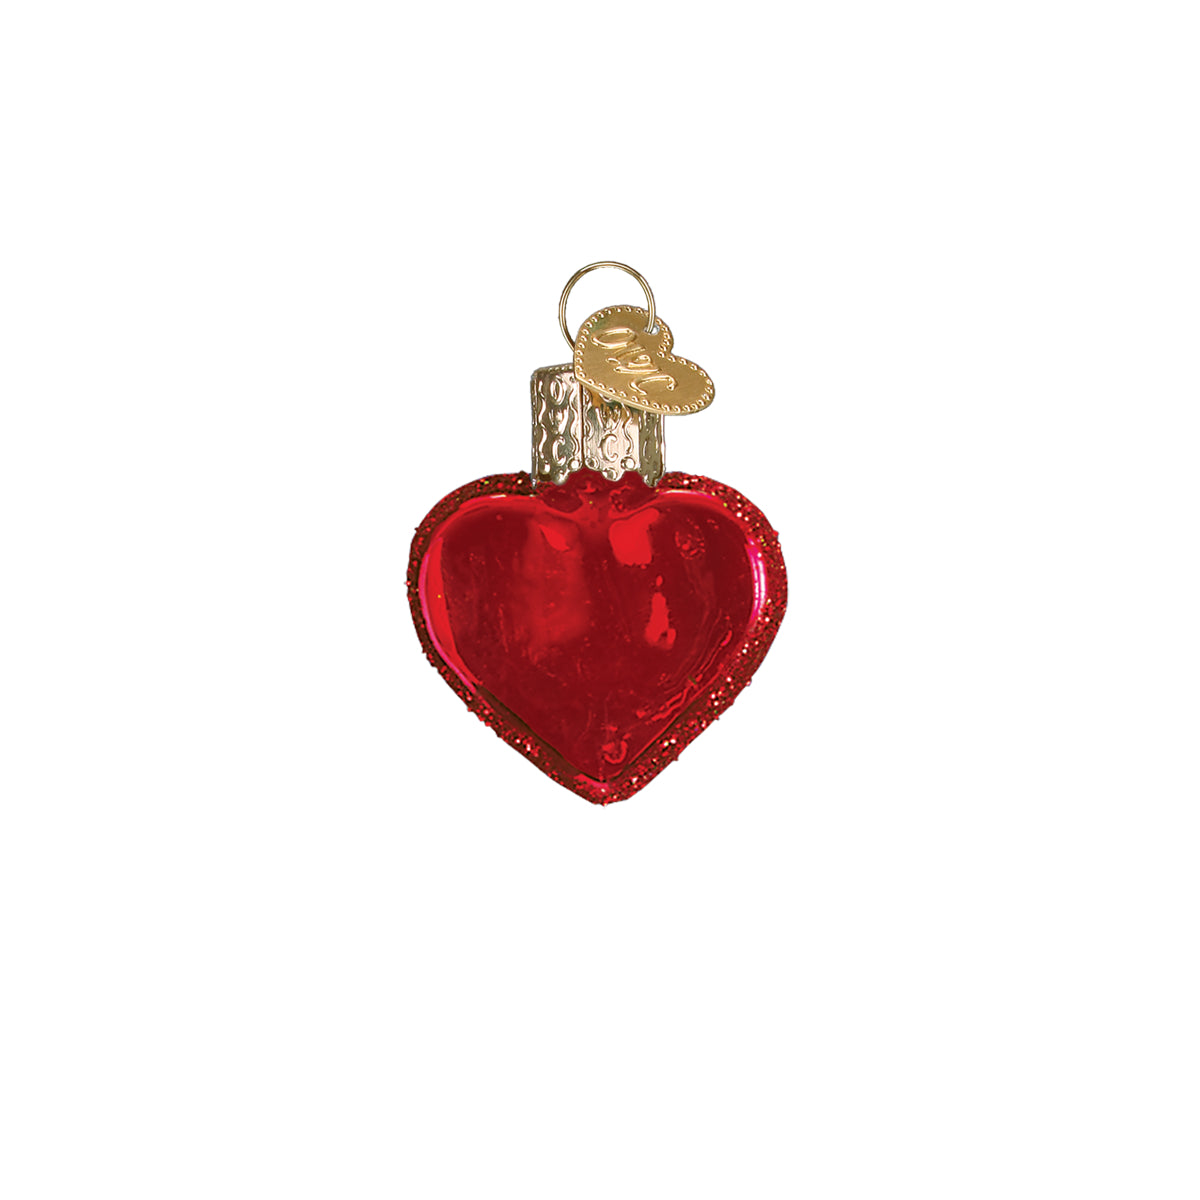 Small Red Heart Ornament